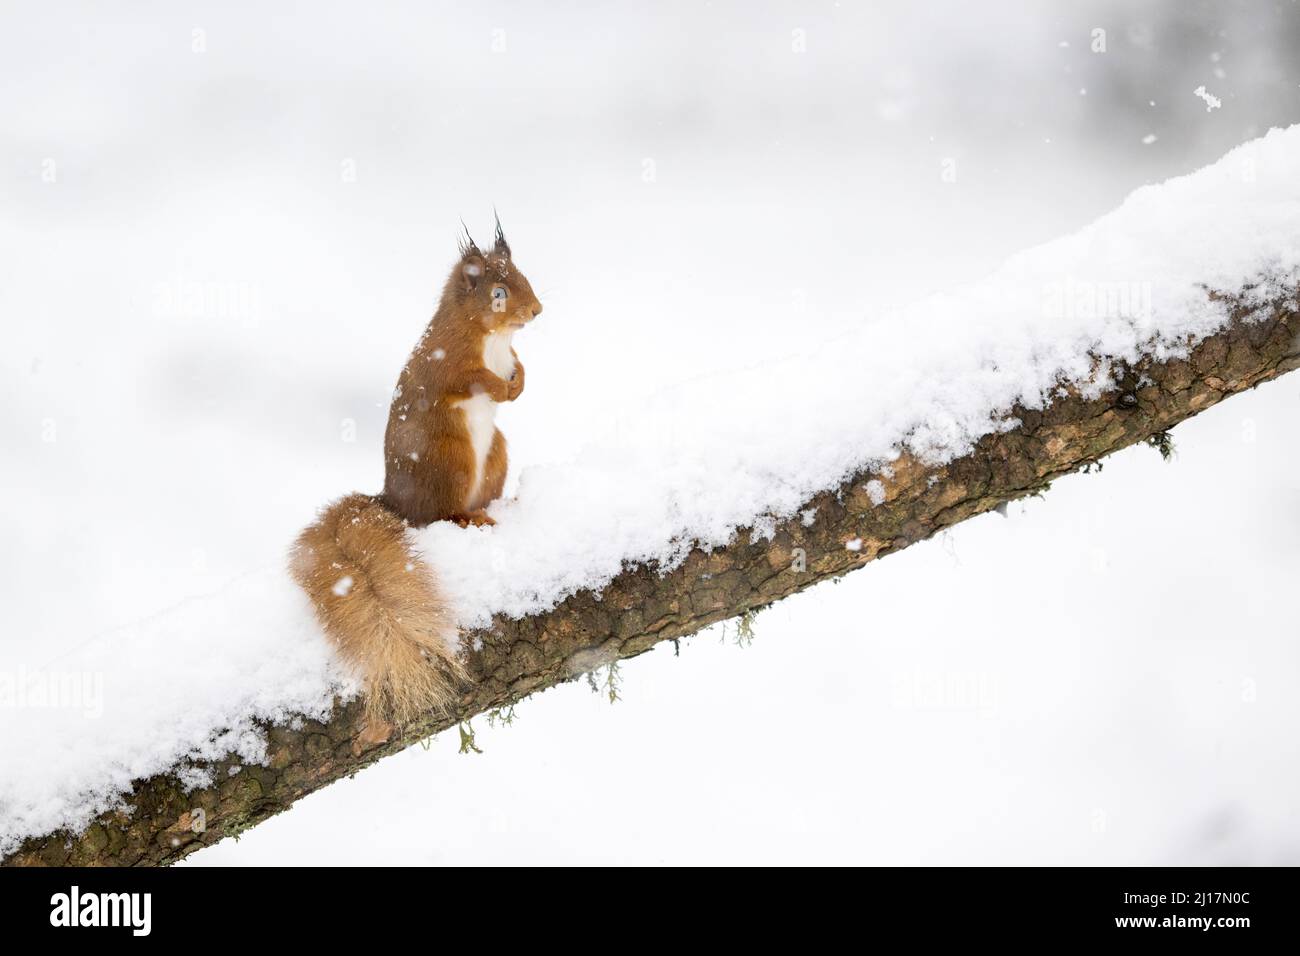 Red squirrel (Sciurus vulgaris) standing on snow-covered branch Stock Photo